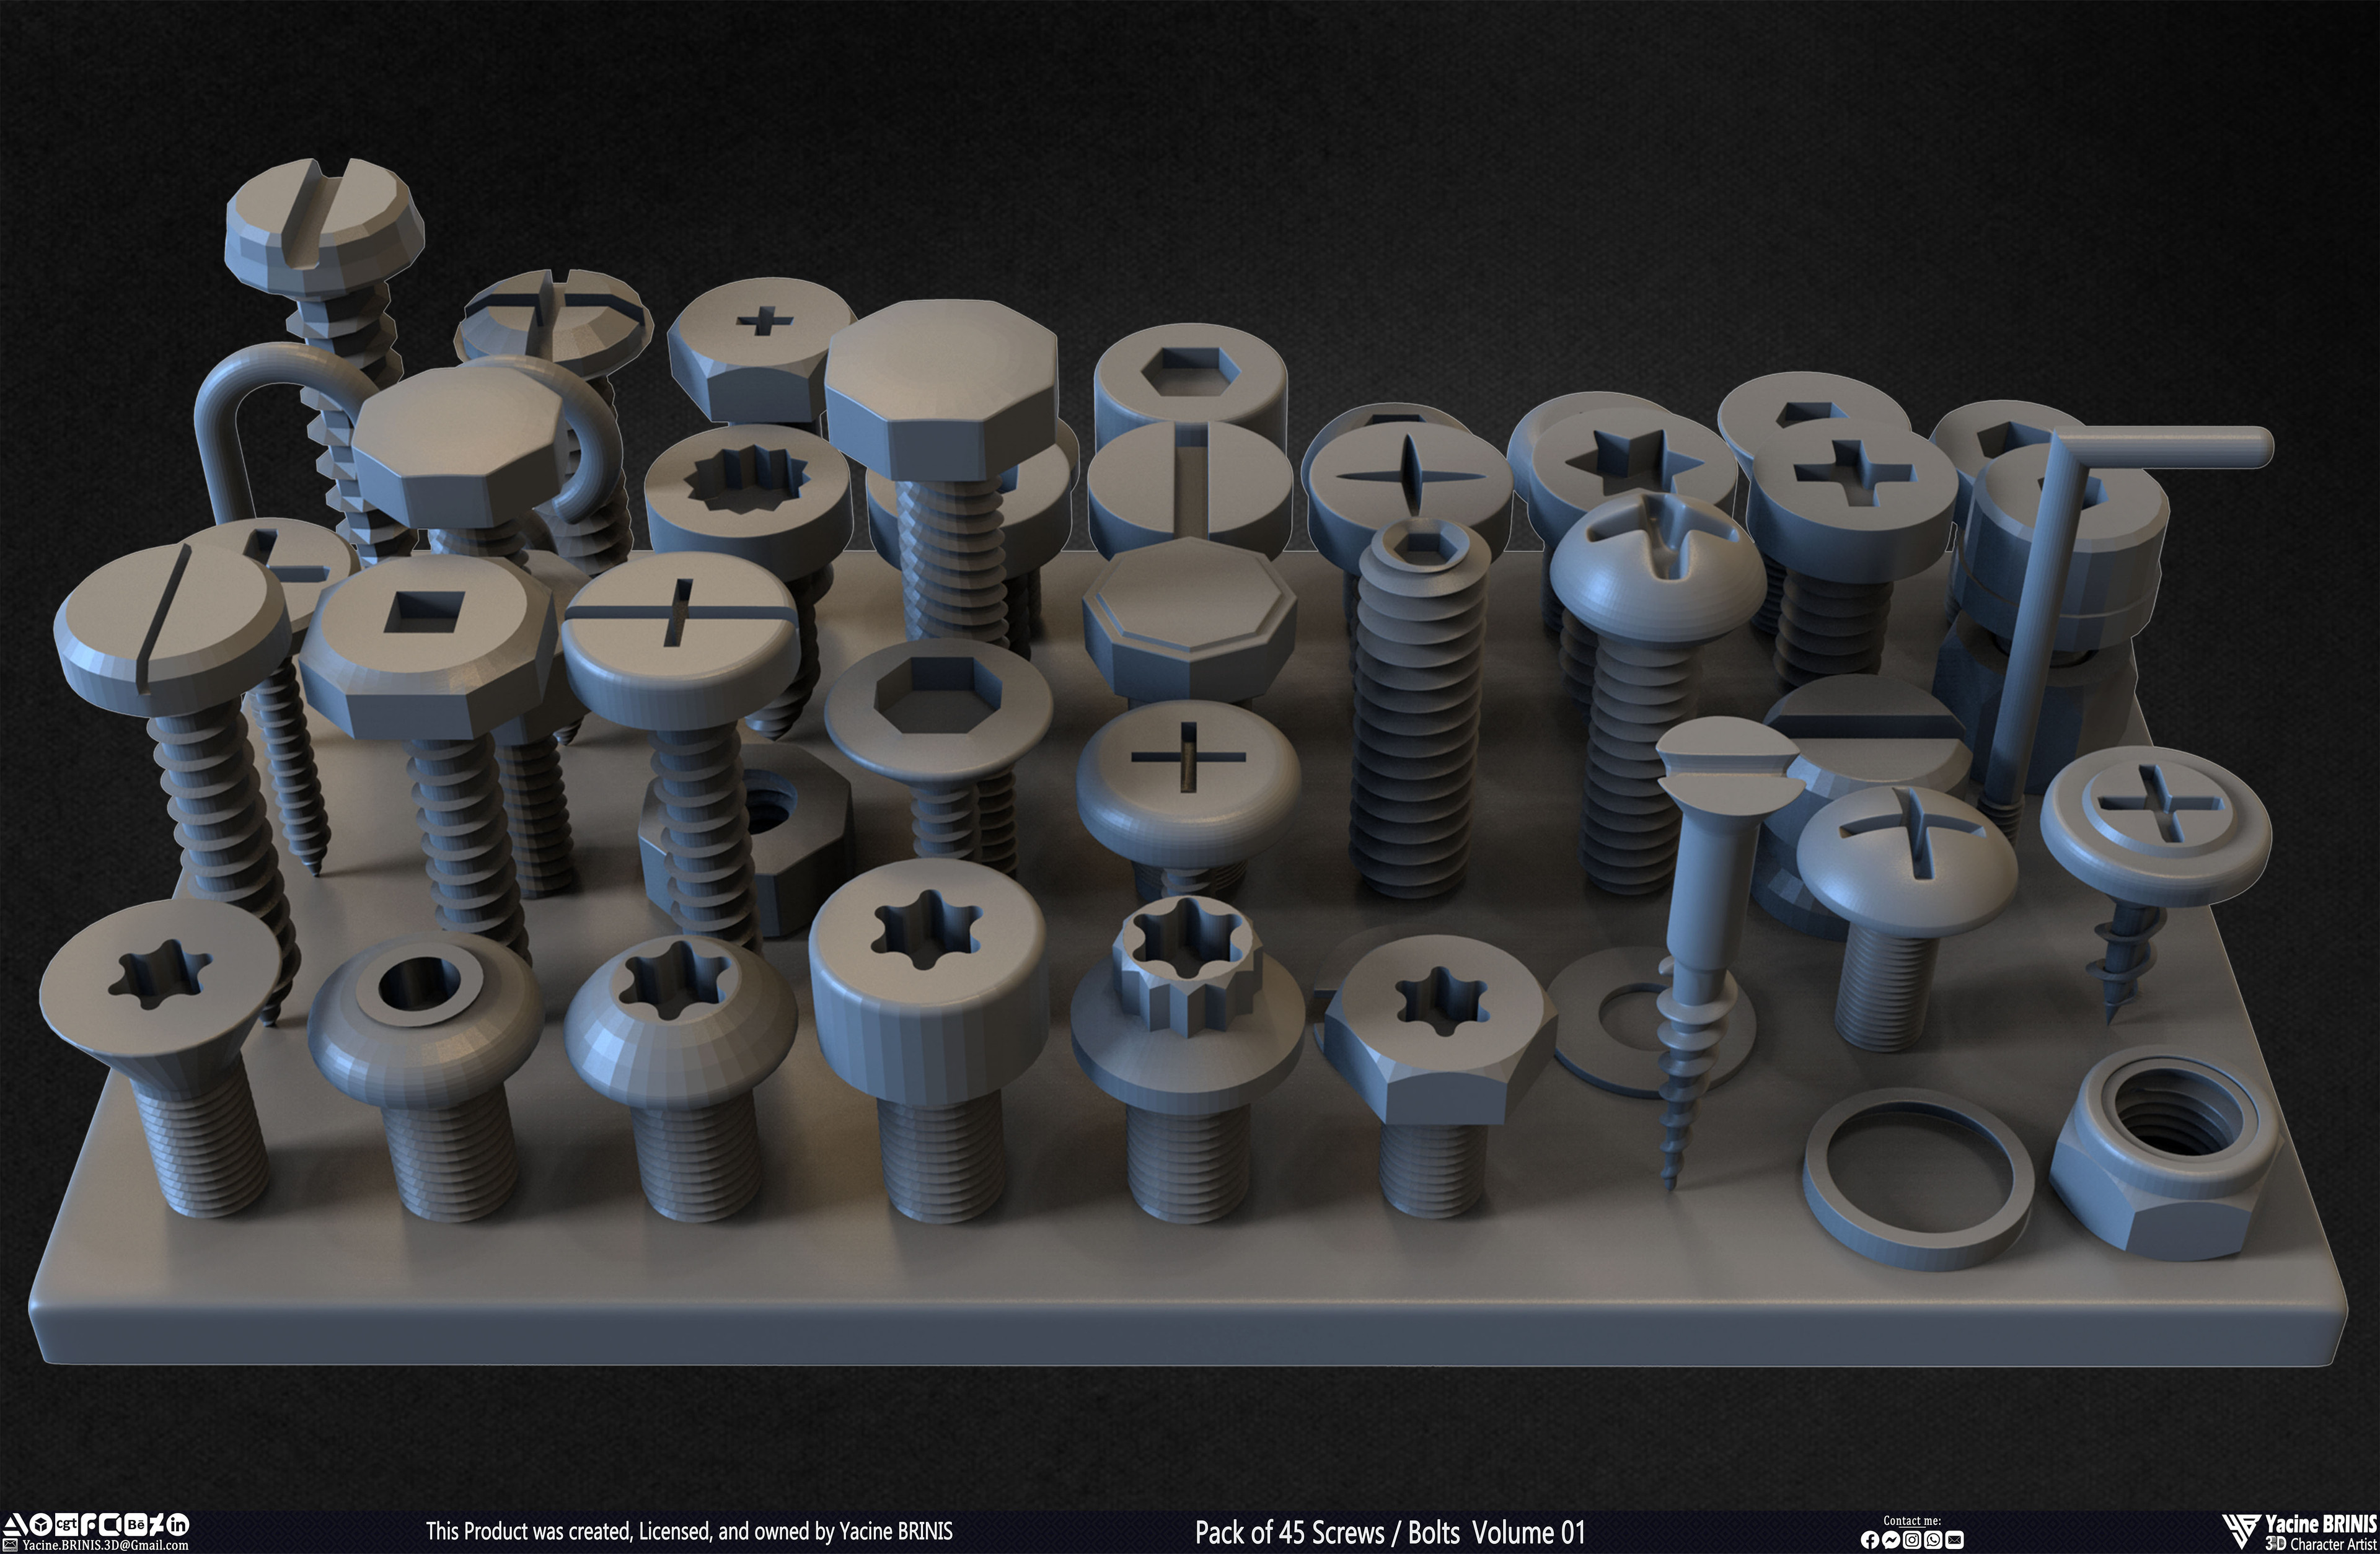 Pack of 45 Screws-Bolts Volume 01 Sculpted By Yacine BRINIS Set 019